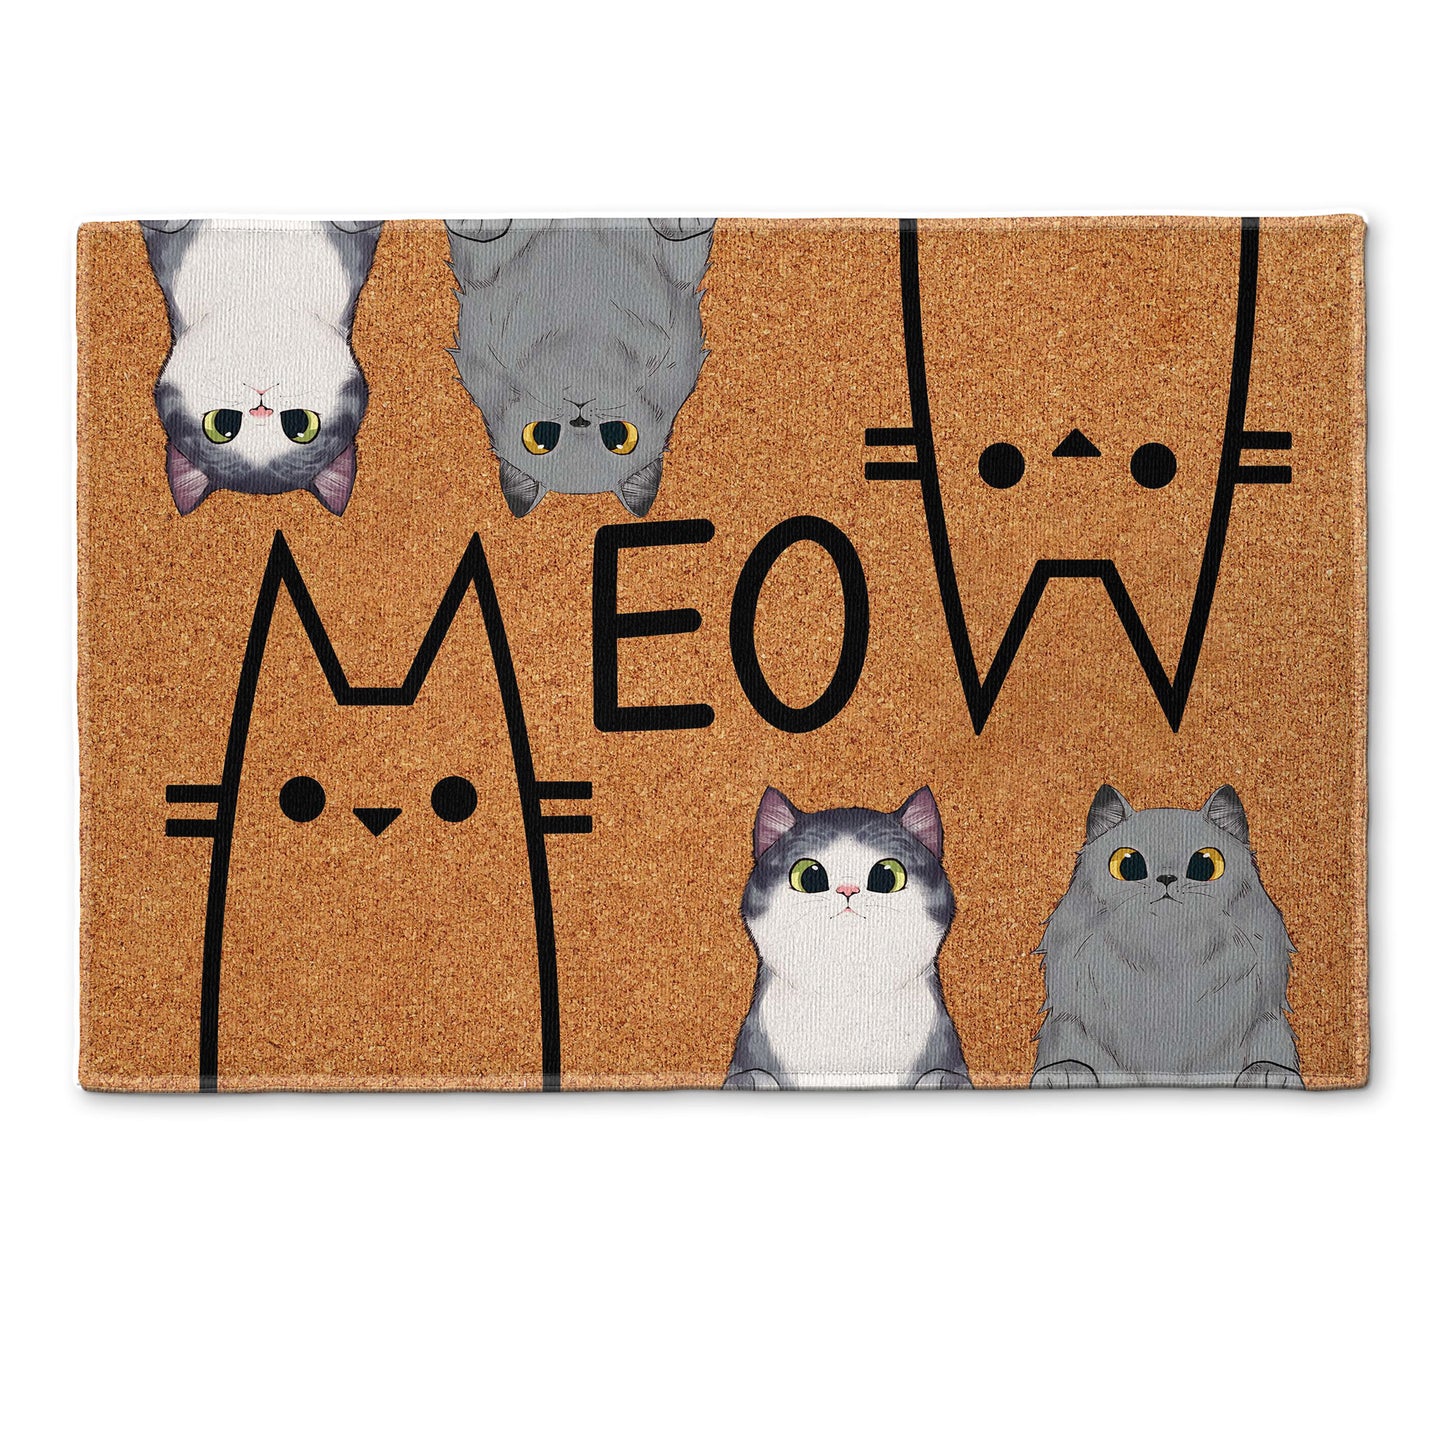 Meow - Personalized Doormat